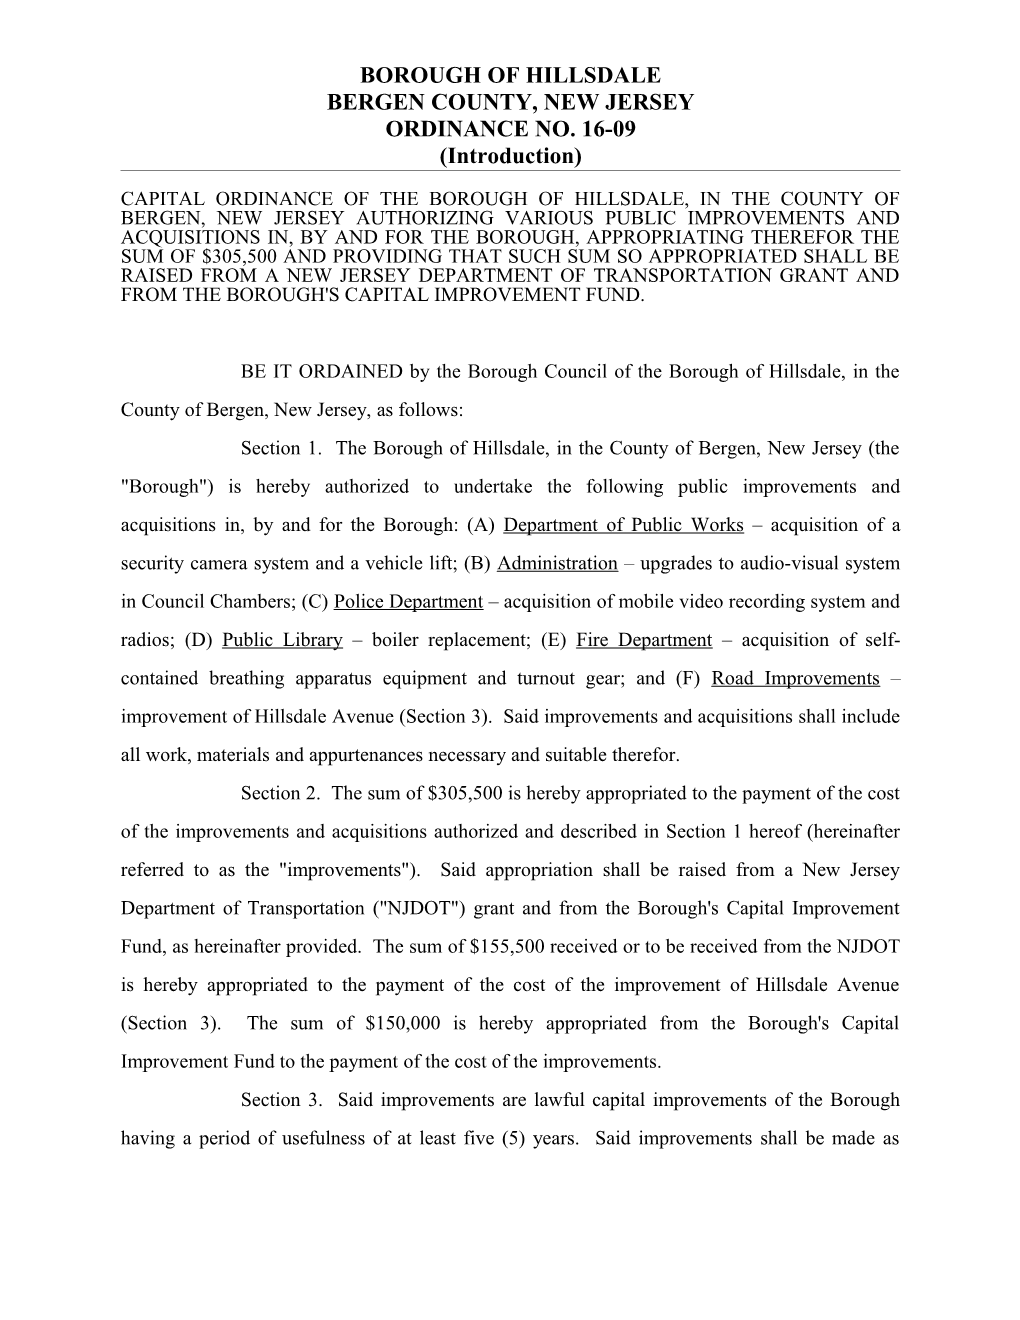 Capital Ordinance of the Borough of Teterboro, in the County of Bergen, New Jersey Authorizing